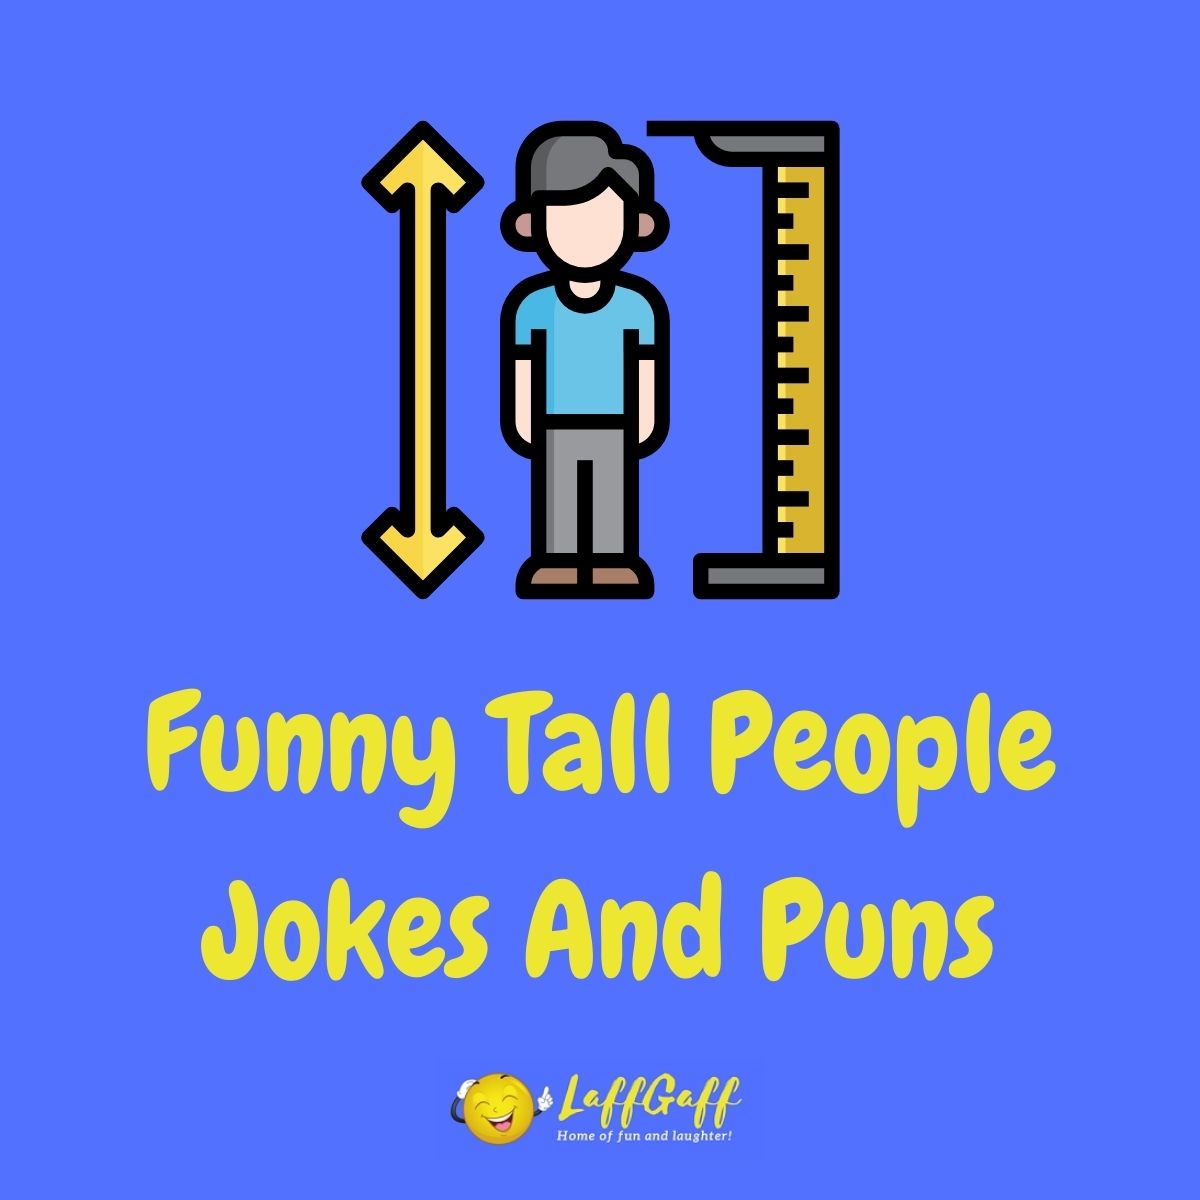 Featured image for a page of funny tall people jokes and puns.